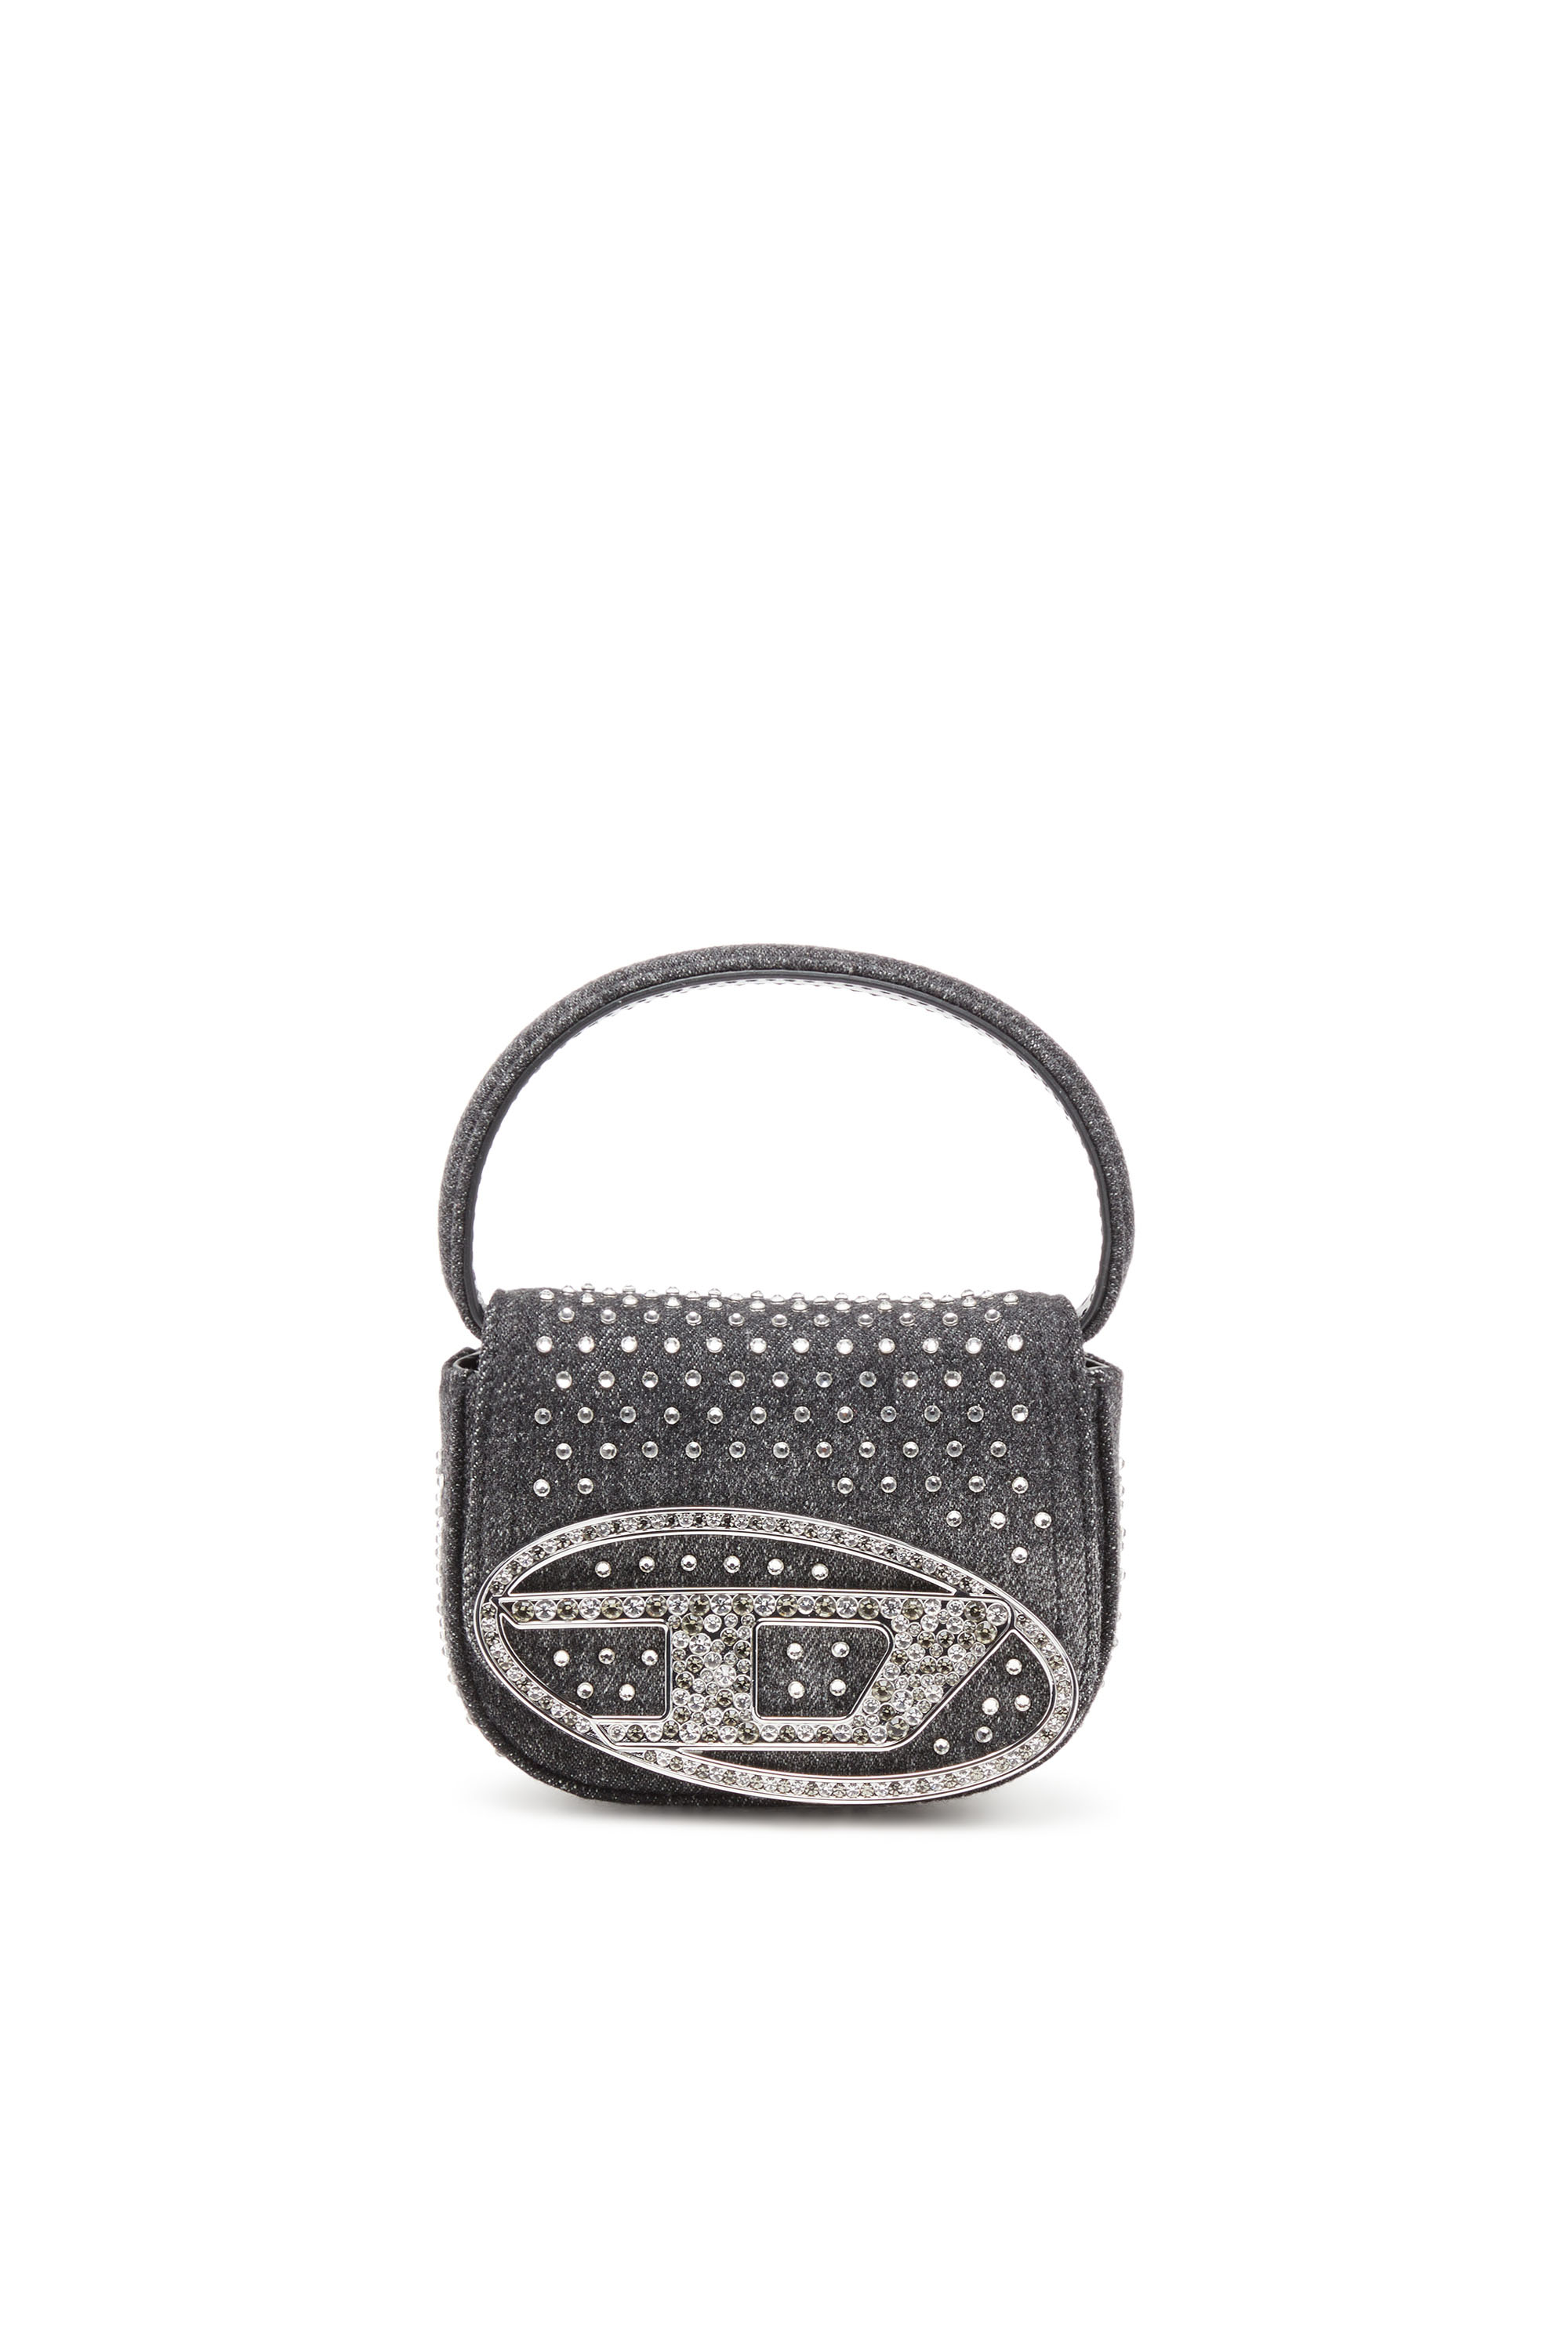 Diesel - 1DR XS, Woman 1DR Xs-Iconic mini bag in denim and crystals in Black - Image 1